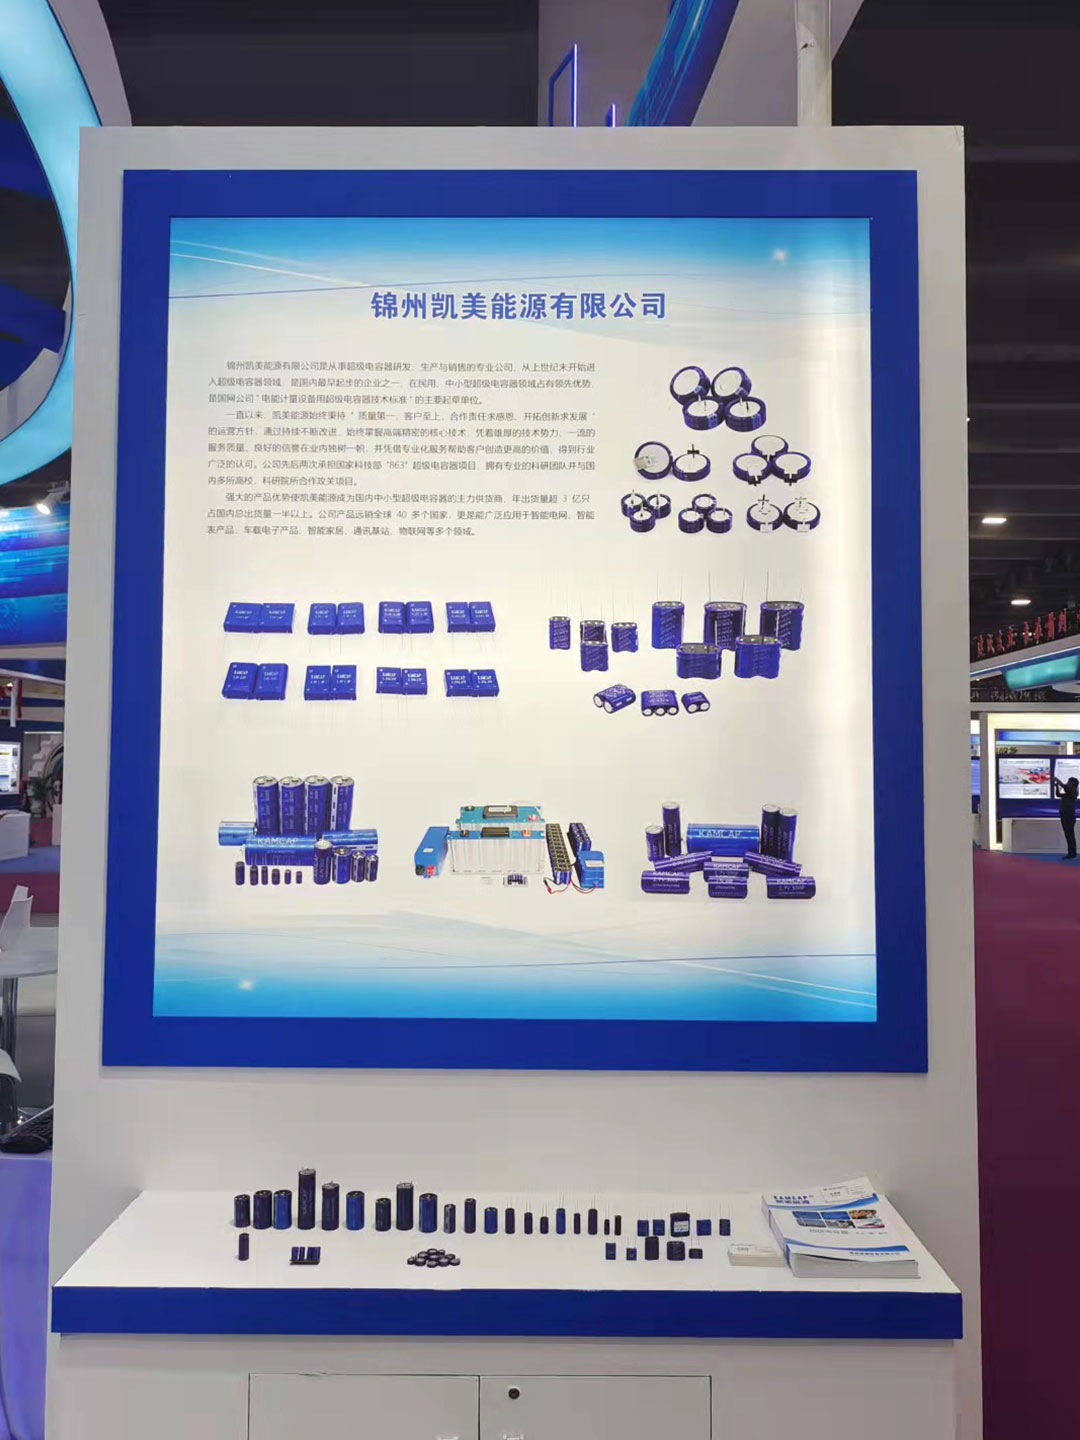 KAMCAP-Participates-in-the-2021-China-Expo-2.jpg